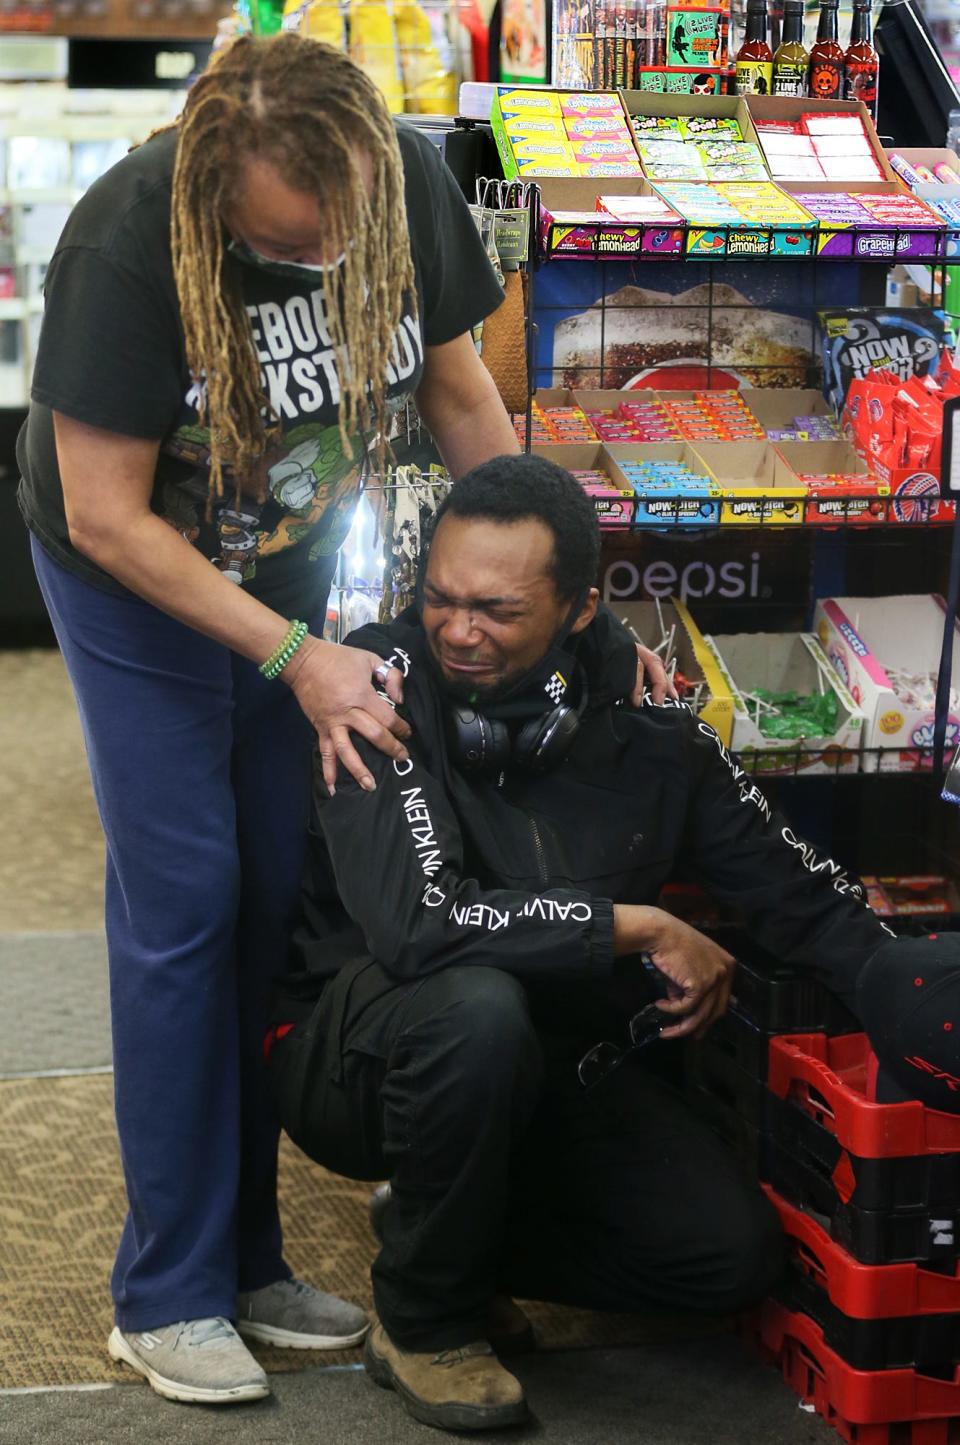 Norma Heard, owner of 2 Live Music in Akron, comforts customer Avery Norris, 25, of Akron, after he breaks down in tears of relief in reaction to the guilty verdict in the police killing of George Floyd in Minneapolis. The stress of Floyd's death, some leaders say, has influenced both the drug overdose and suicide rates in Greater Akron.